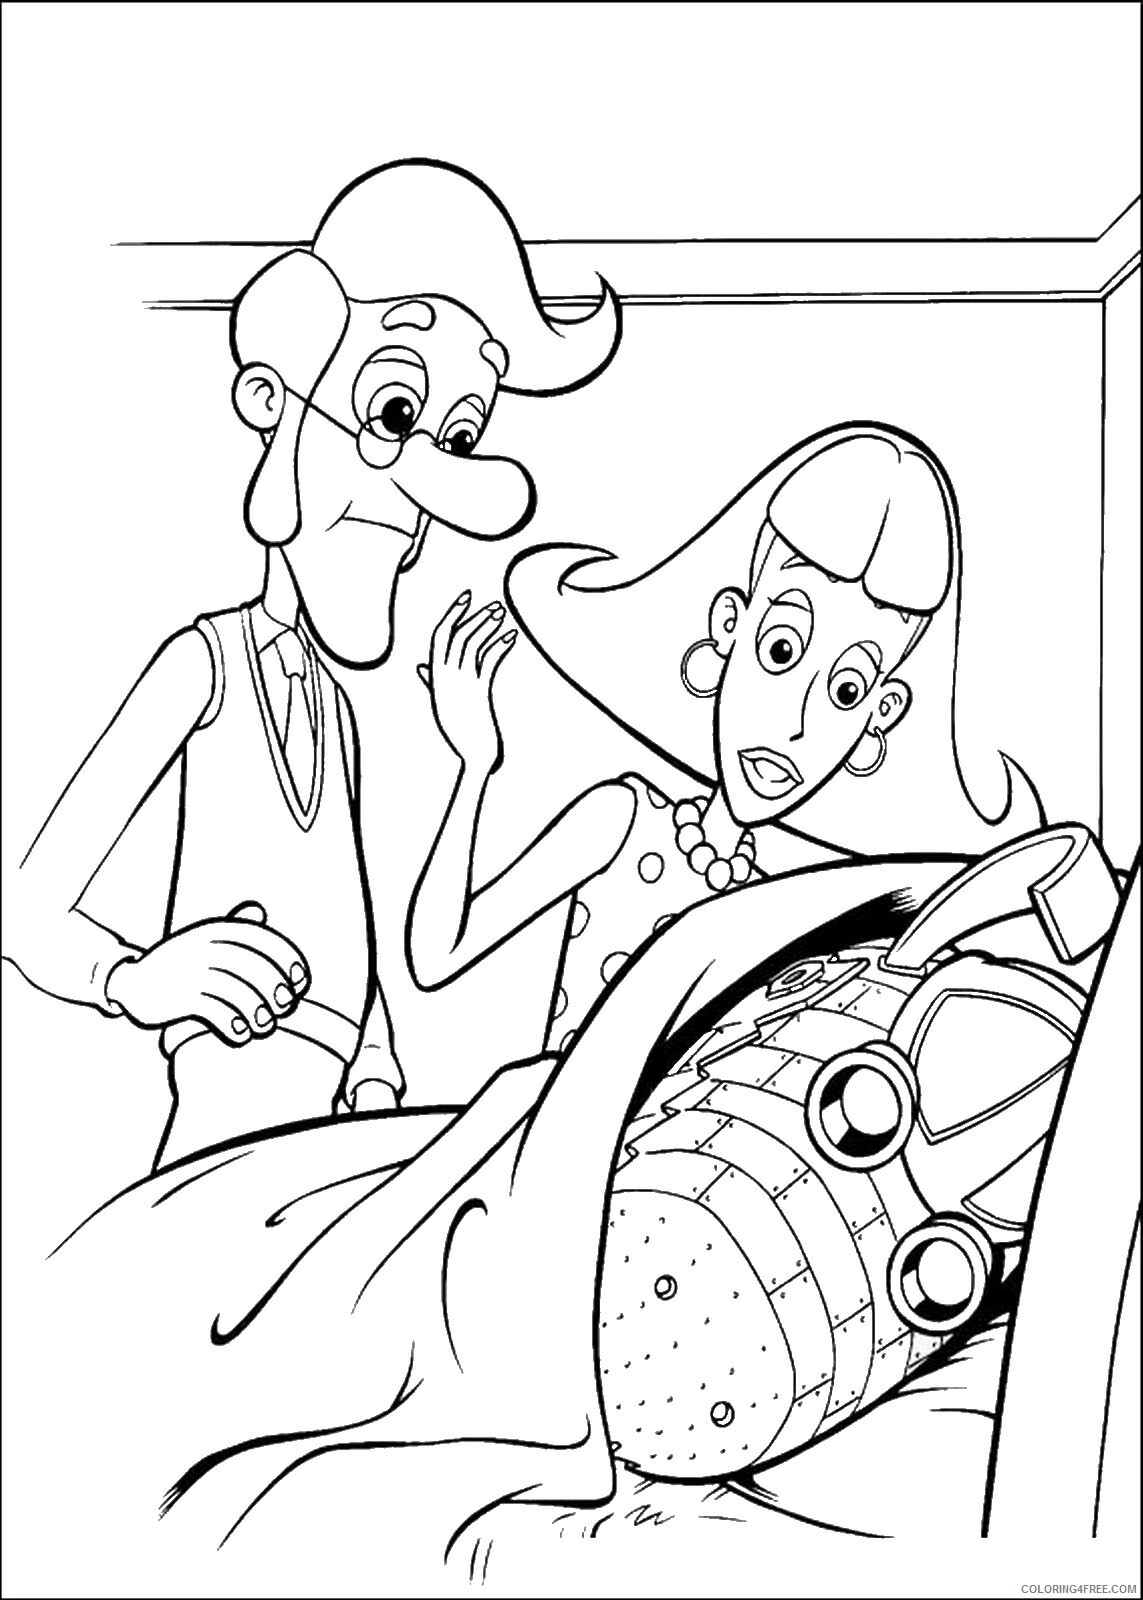 Jimmy Neutron Coloring Pages TV Film jimmy_neutron_cl09 Printable 2020 04127 Coloring4free